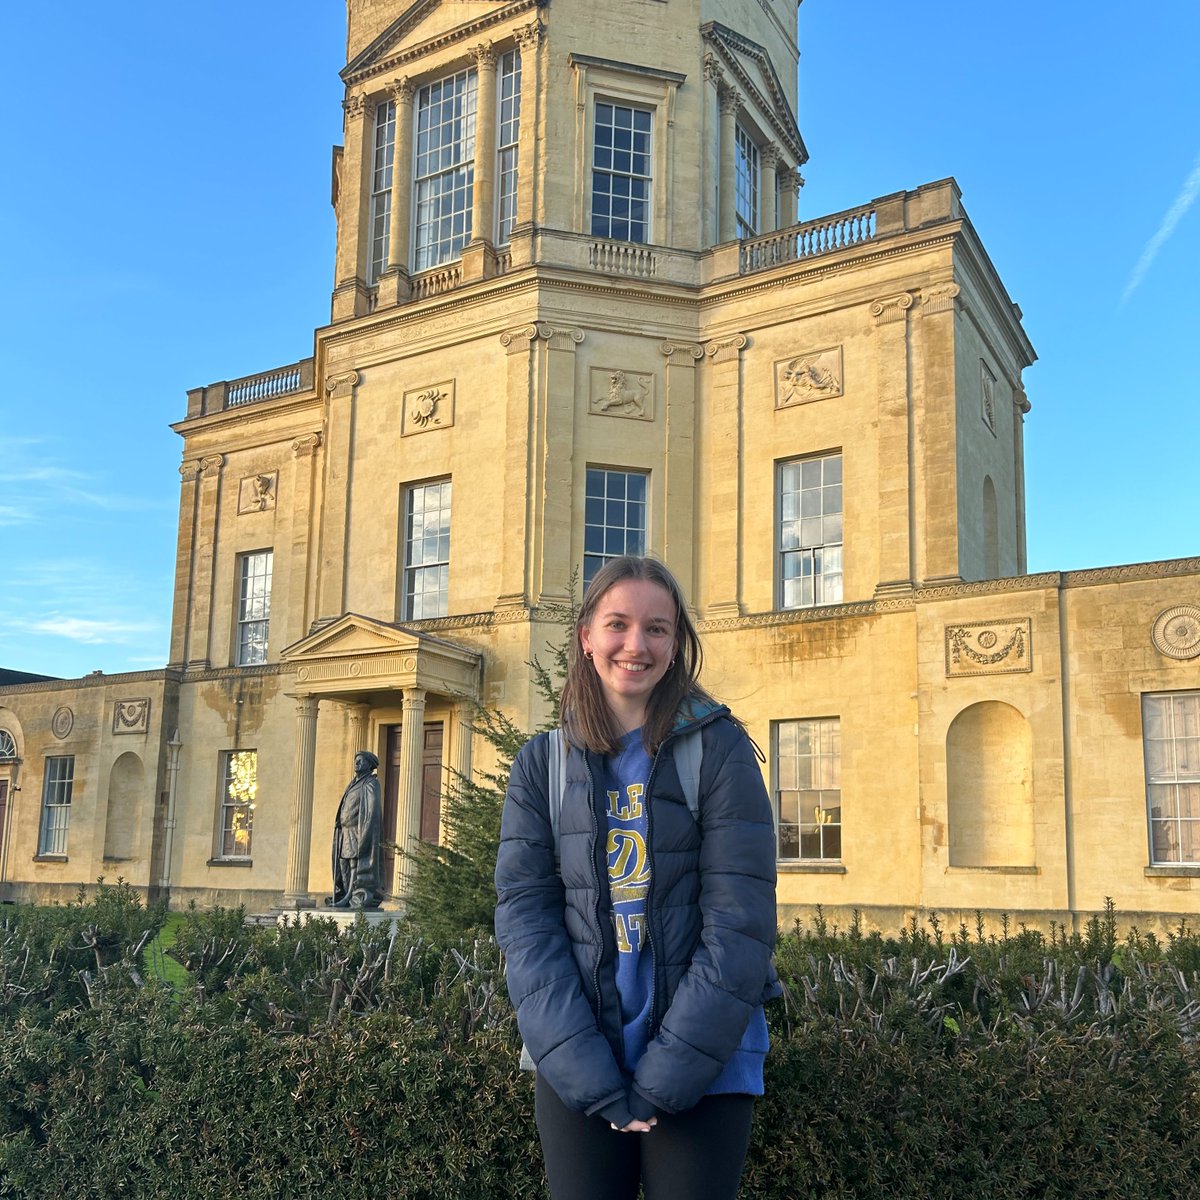 It All Adds Up for keen Mathematician Eleanor at @UniofOxford. For the full story, please visit: habsmonmouth.org/it-all-adds-up…